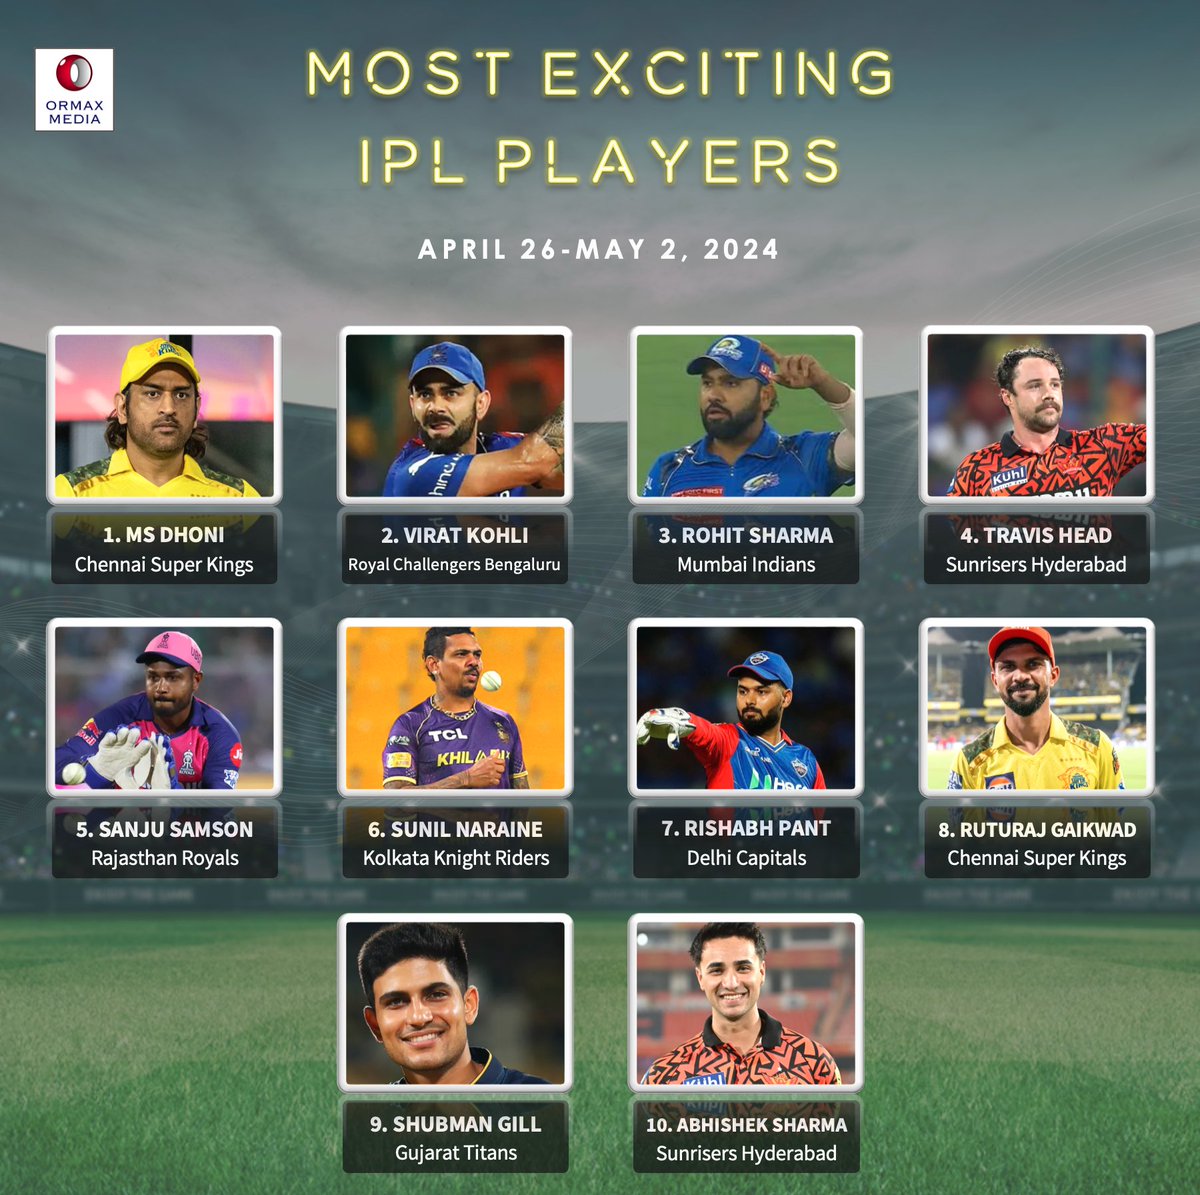 Most exciting IPL players (Apr 26-May 2)
#IPL2024